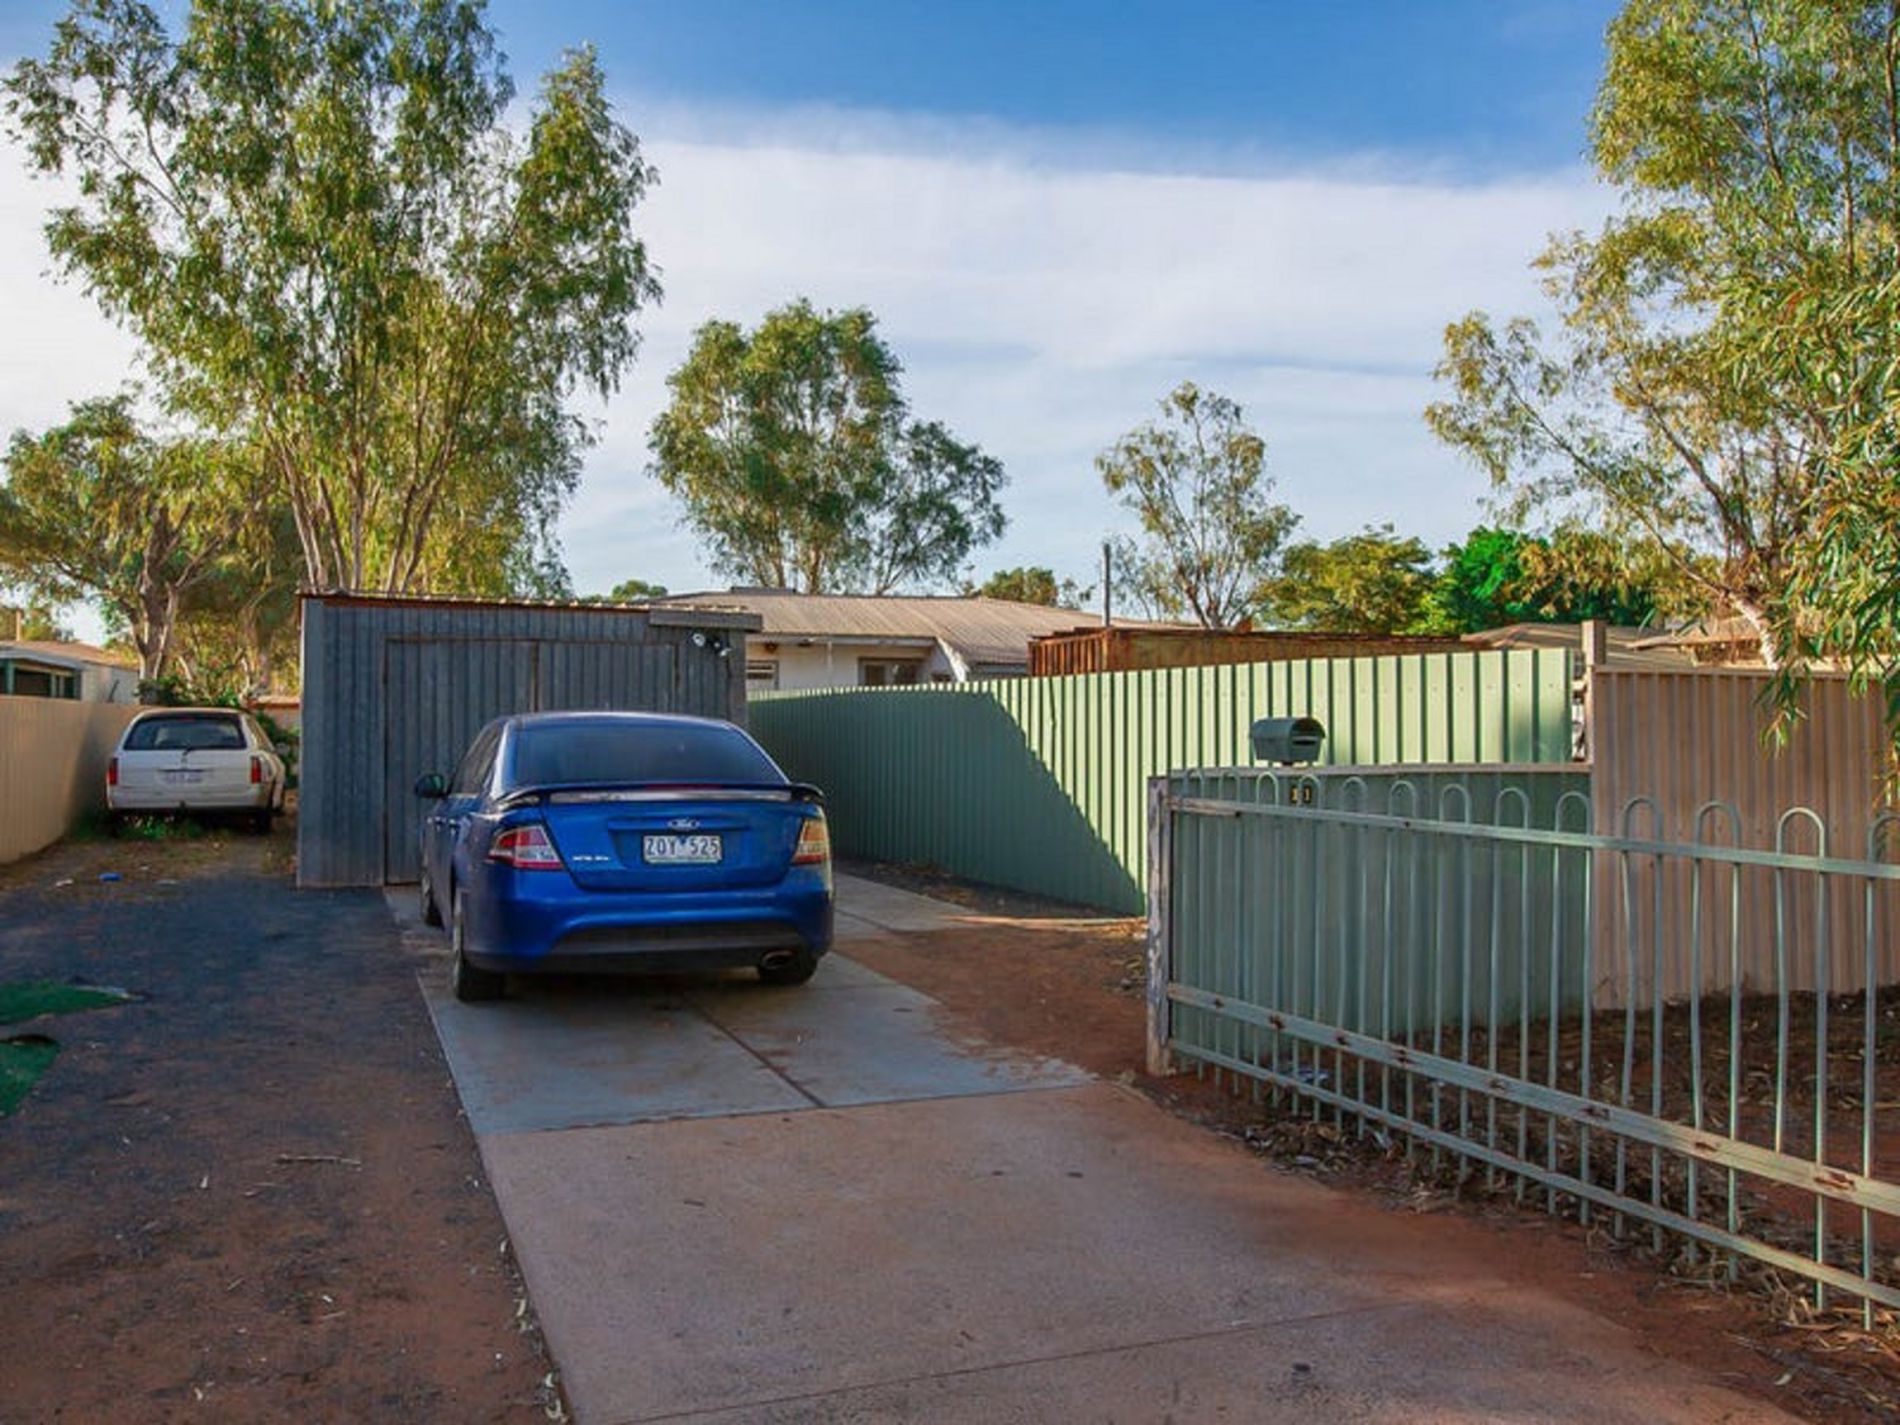 11 Corboys Place, South Hedland